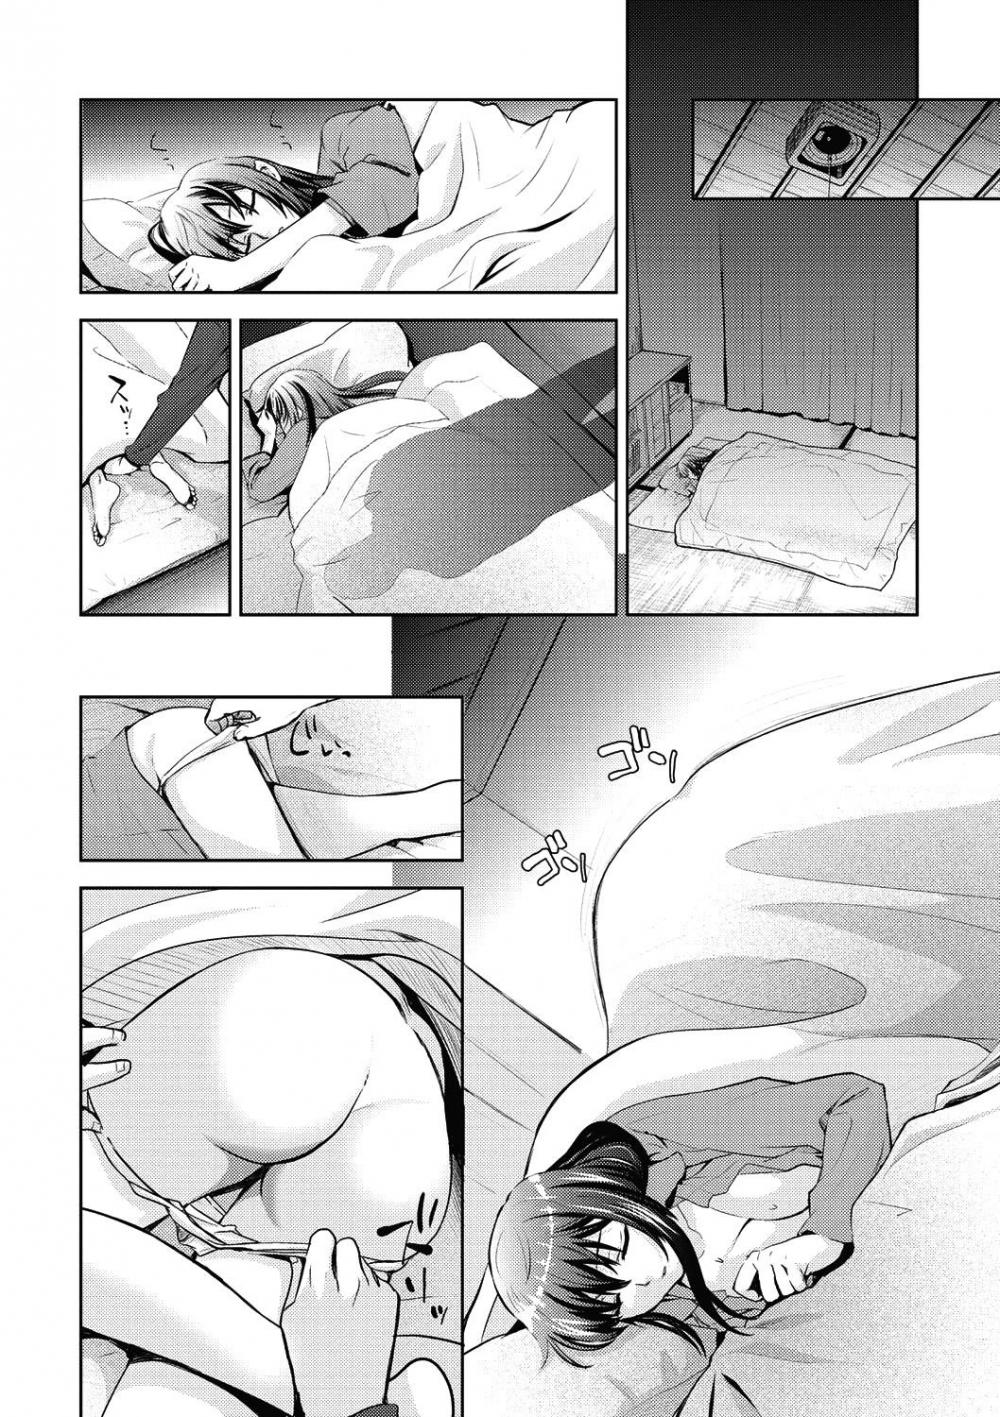 Hentai Manga Comic-From Now On She'll Be Doing NTR-Chapter 11-4